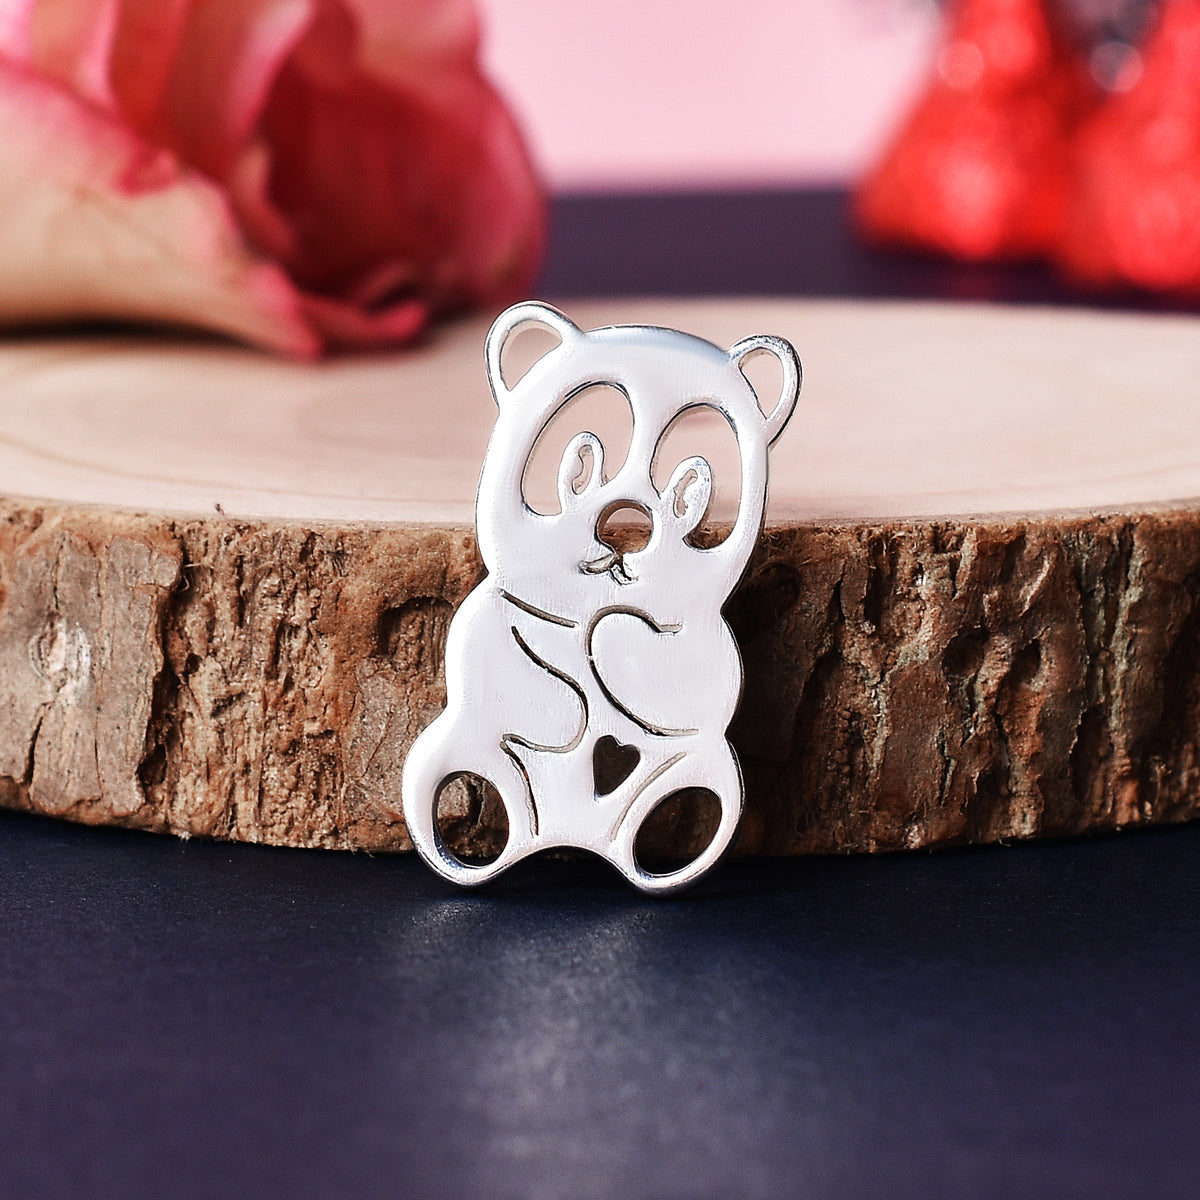 Panda Love Silver Coin With Greeting Card